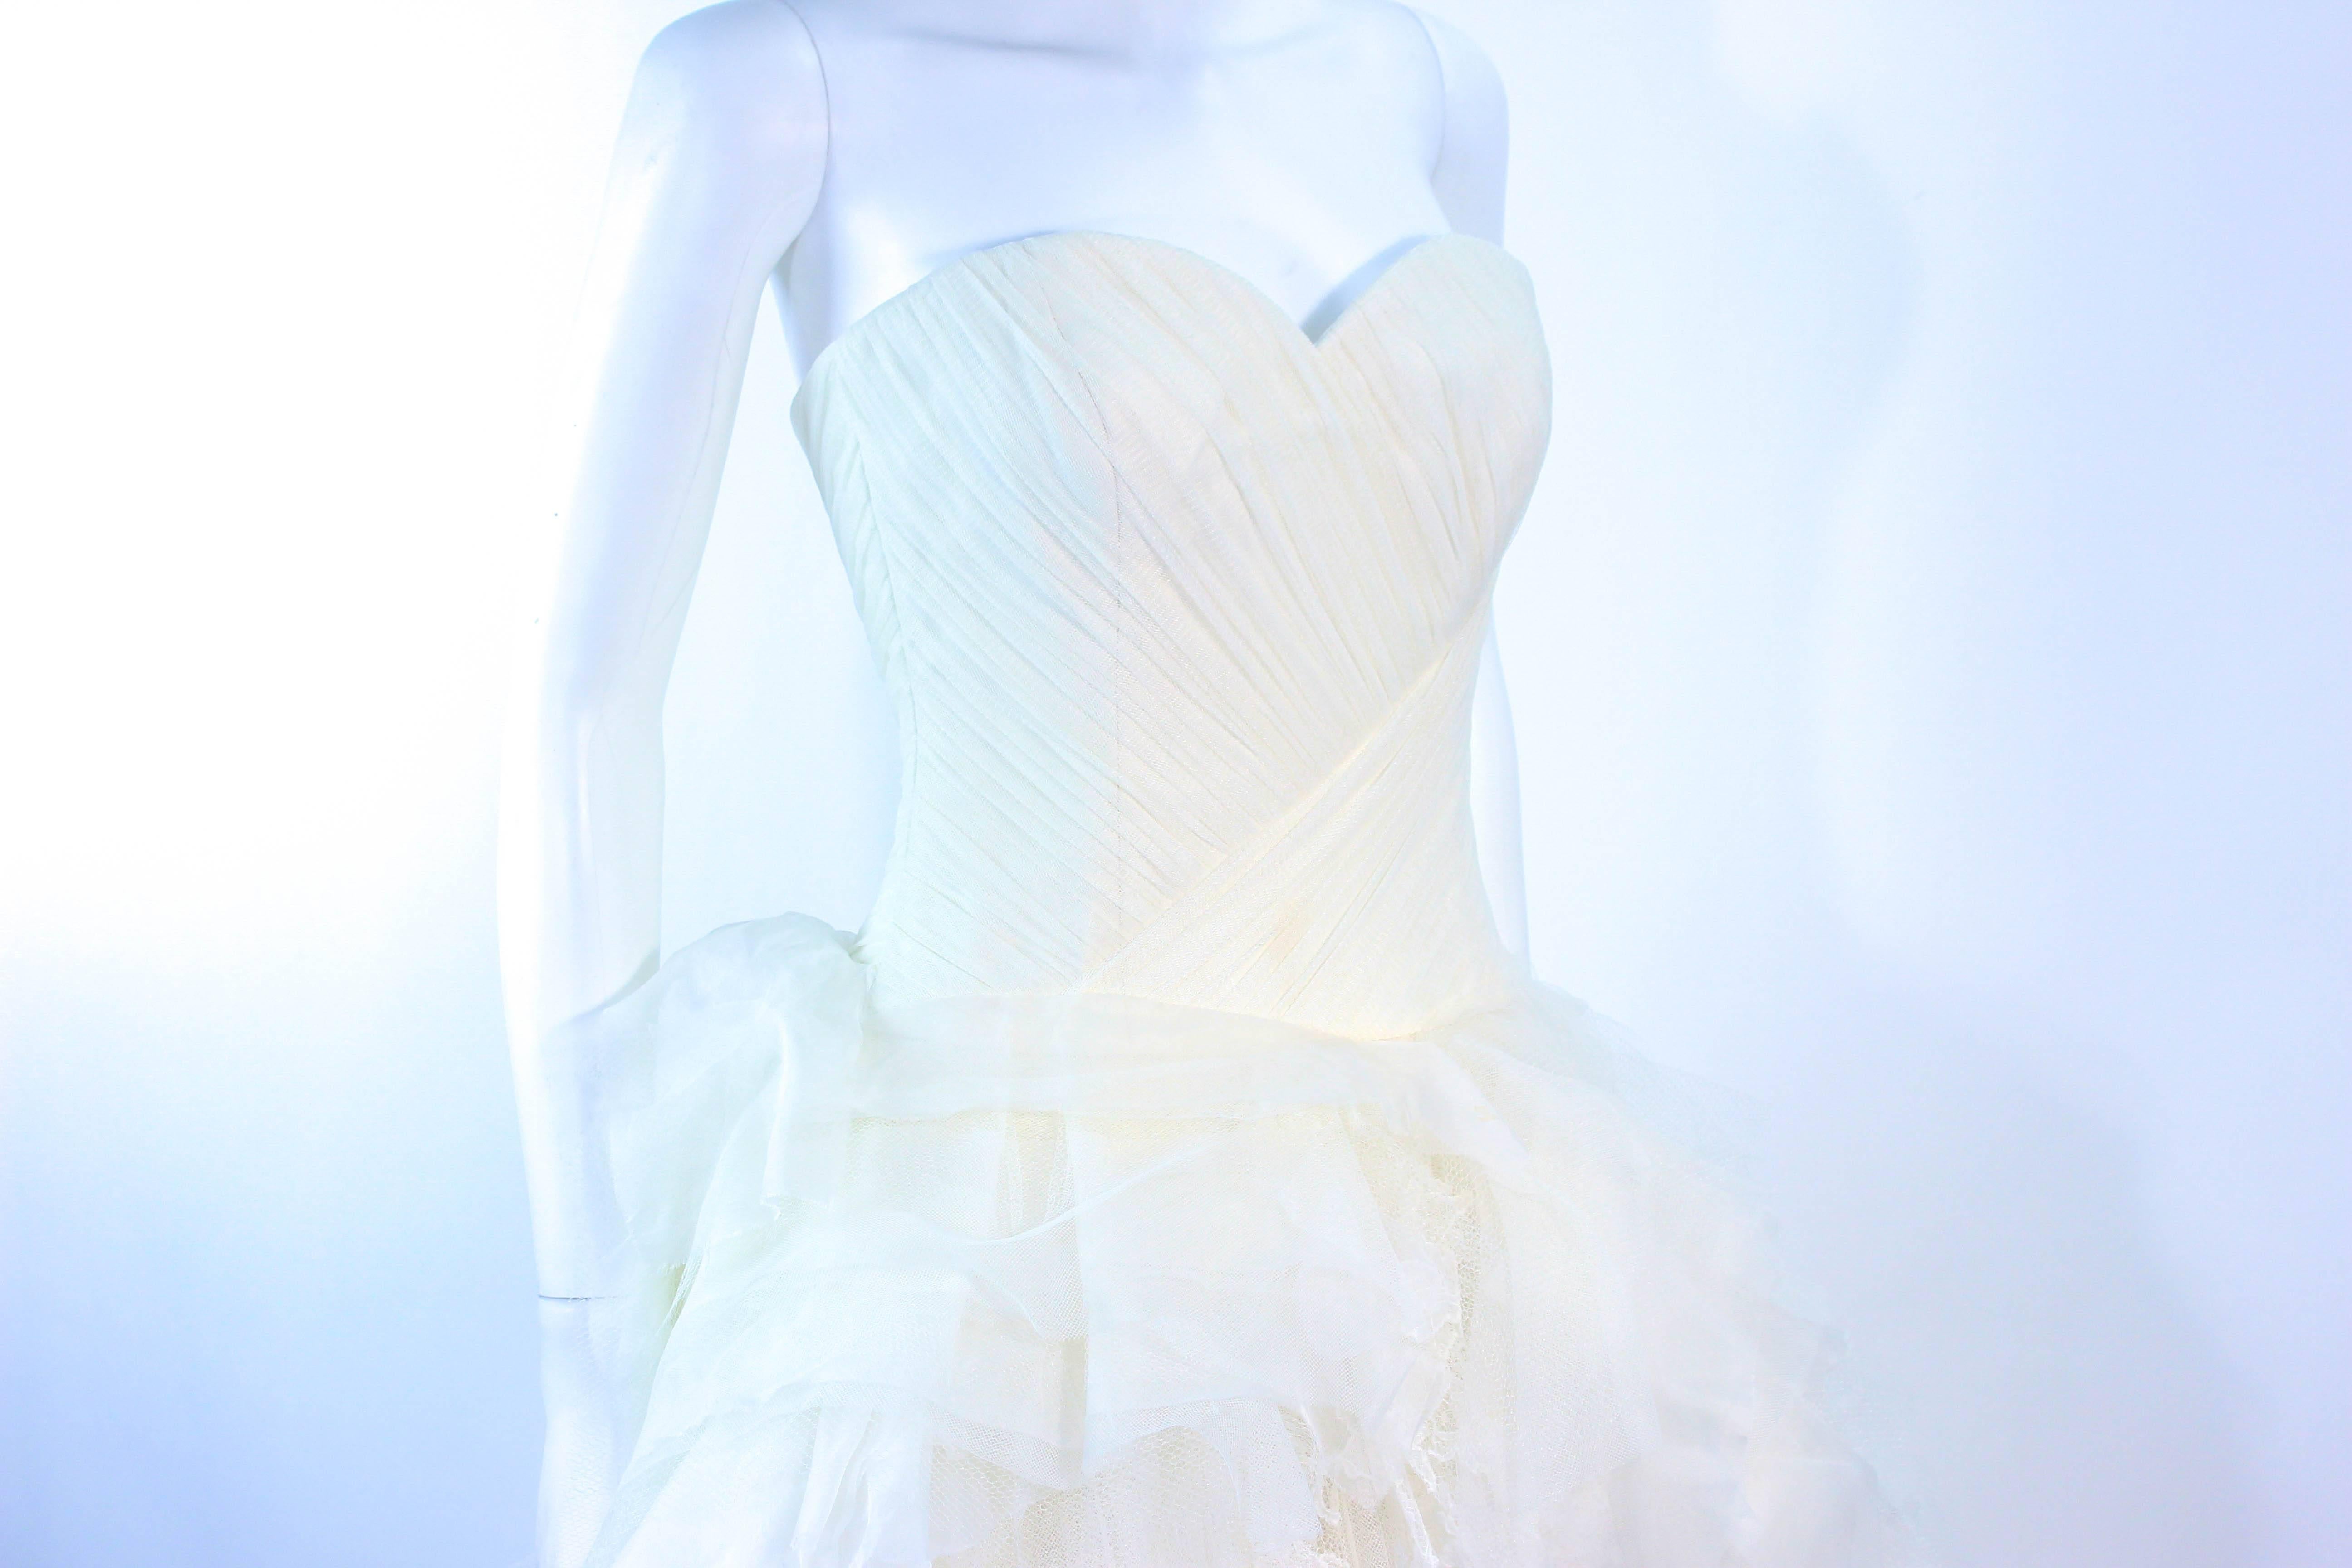 how much are vera wang wedding dresses